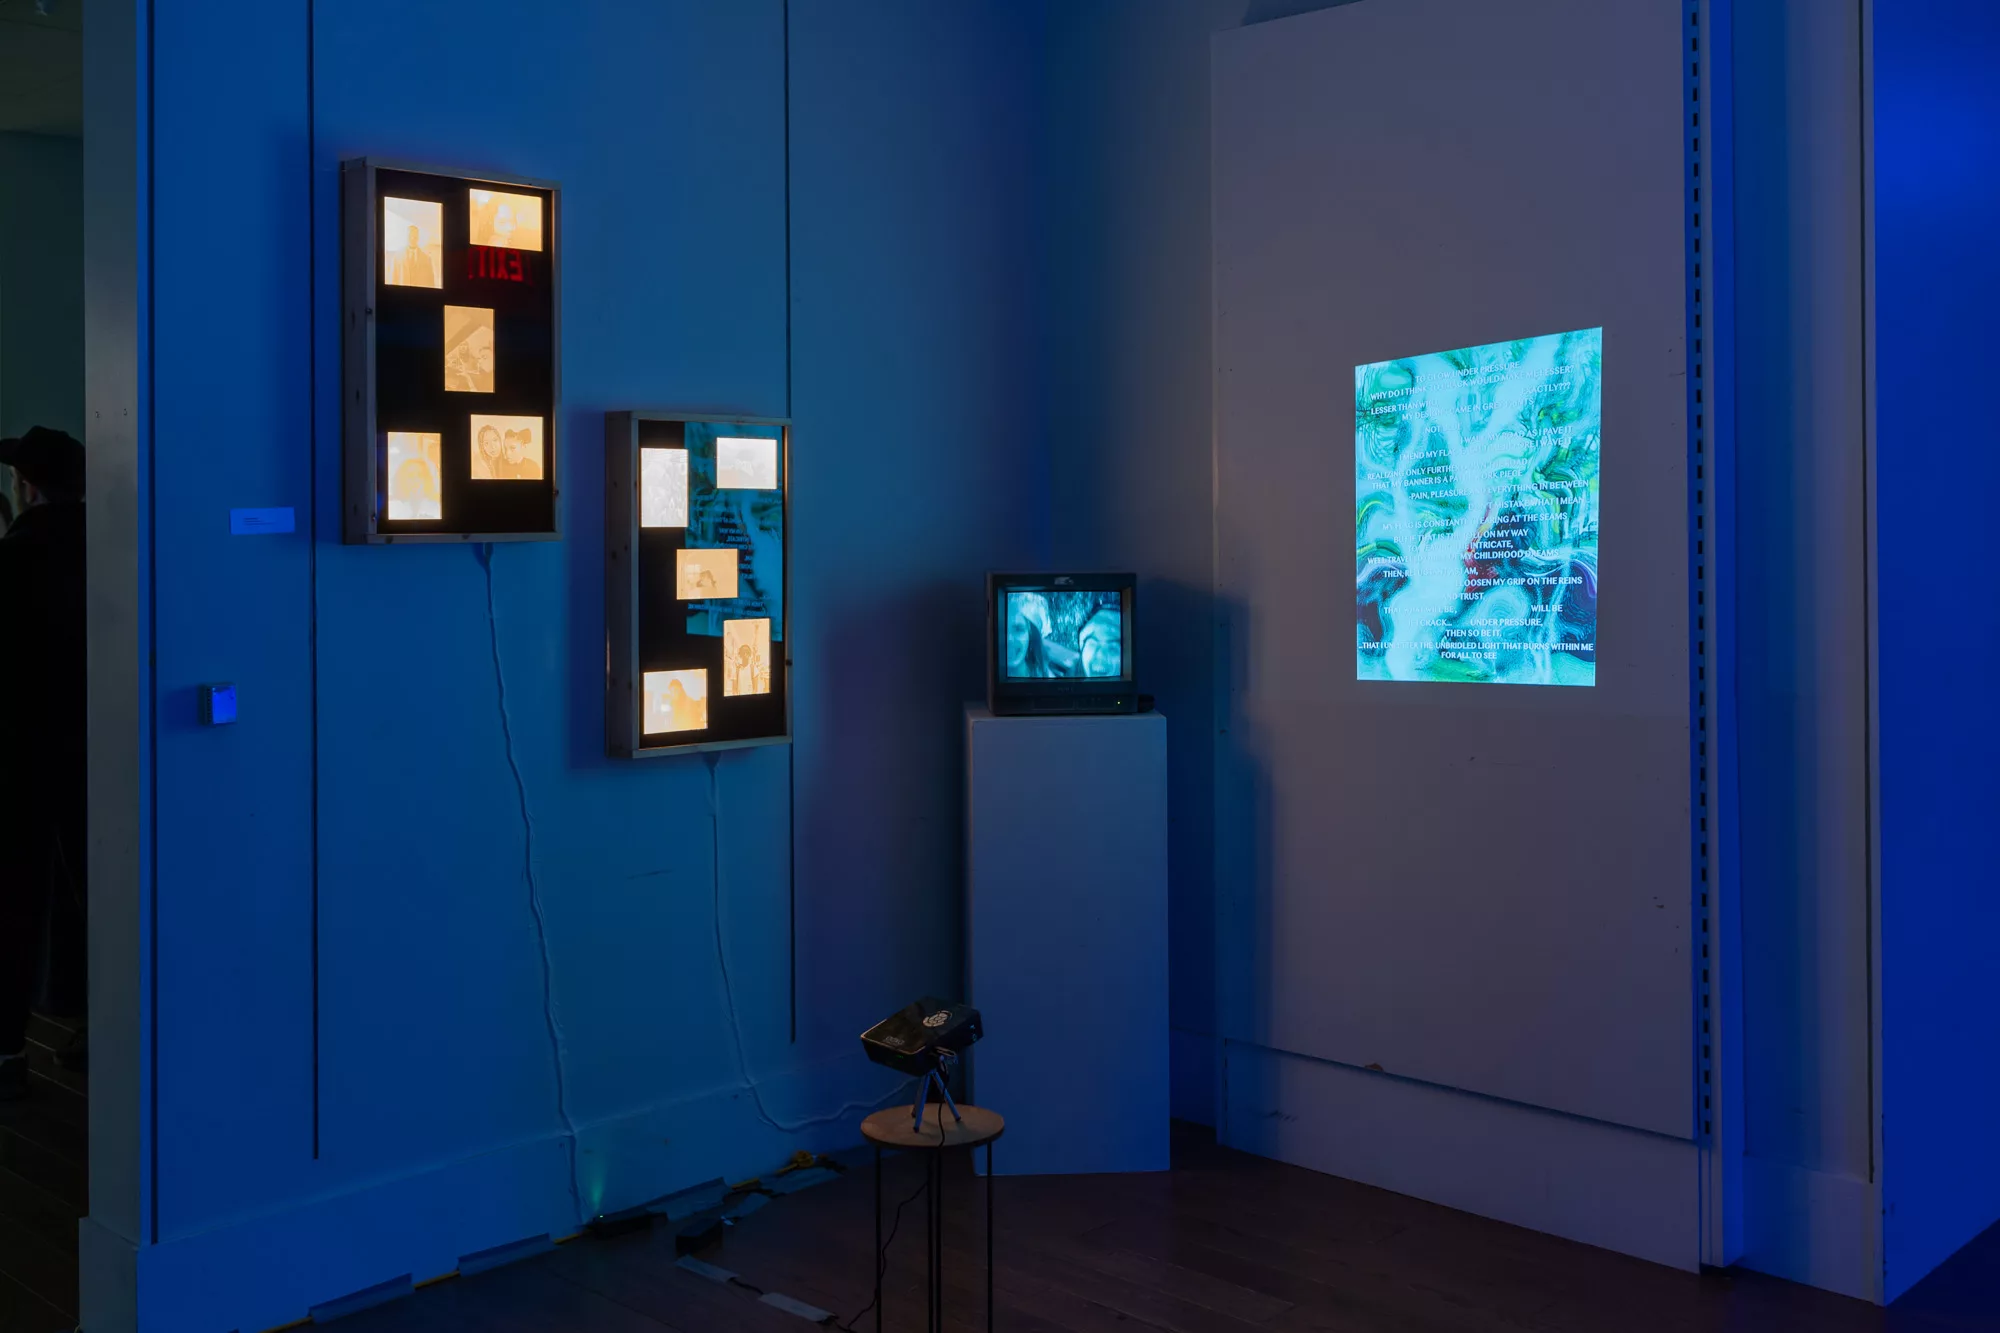 A video plays on a TV on a pedestal in the corner of a room. Two light boxes, each with 5 glowing, 3d printed photographs, hang on the wall to the left. A second video is projected on the the wall to the right of the pedestal.